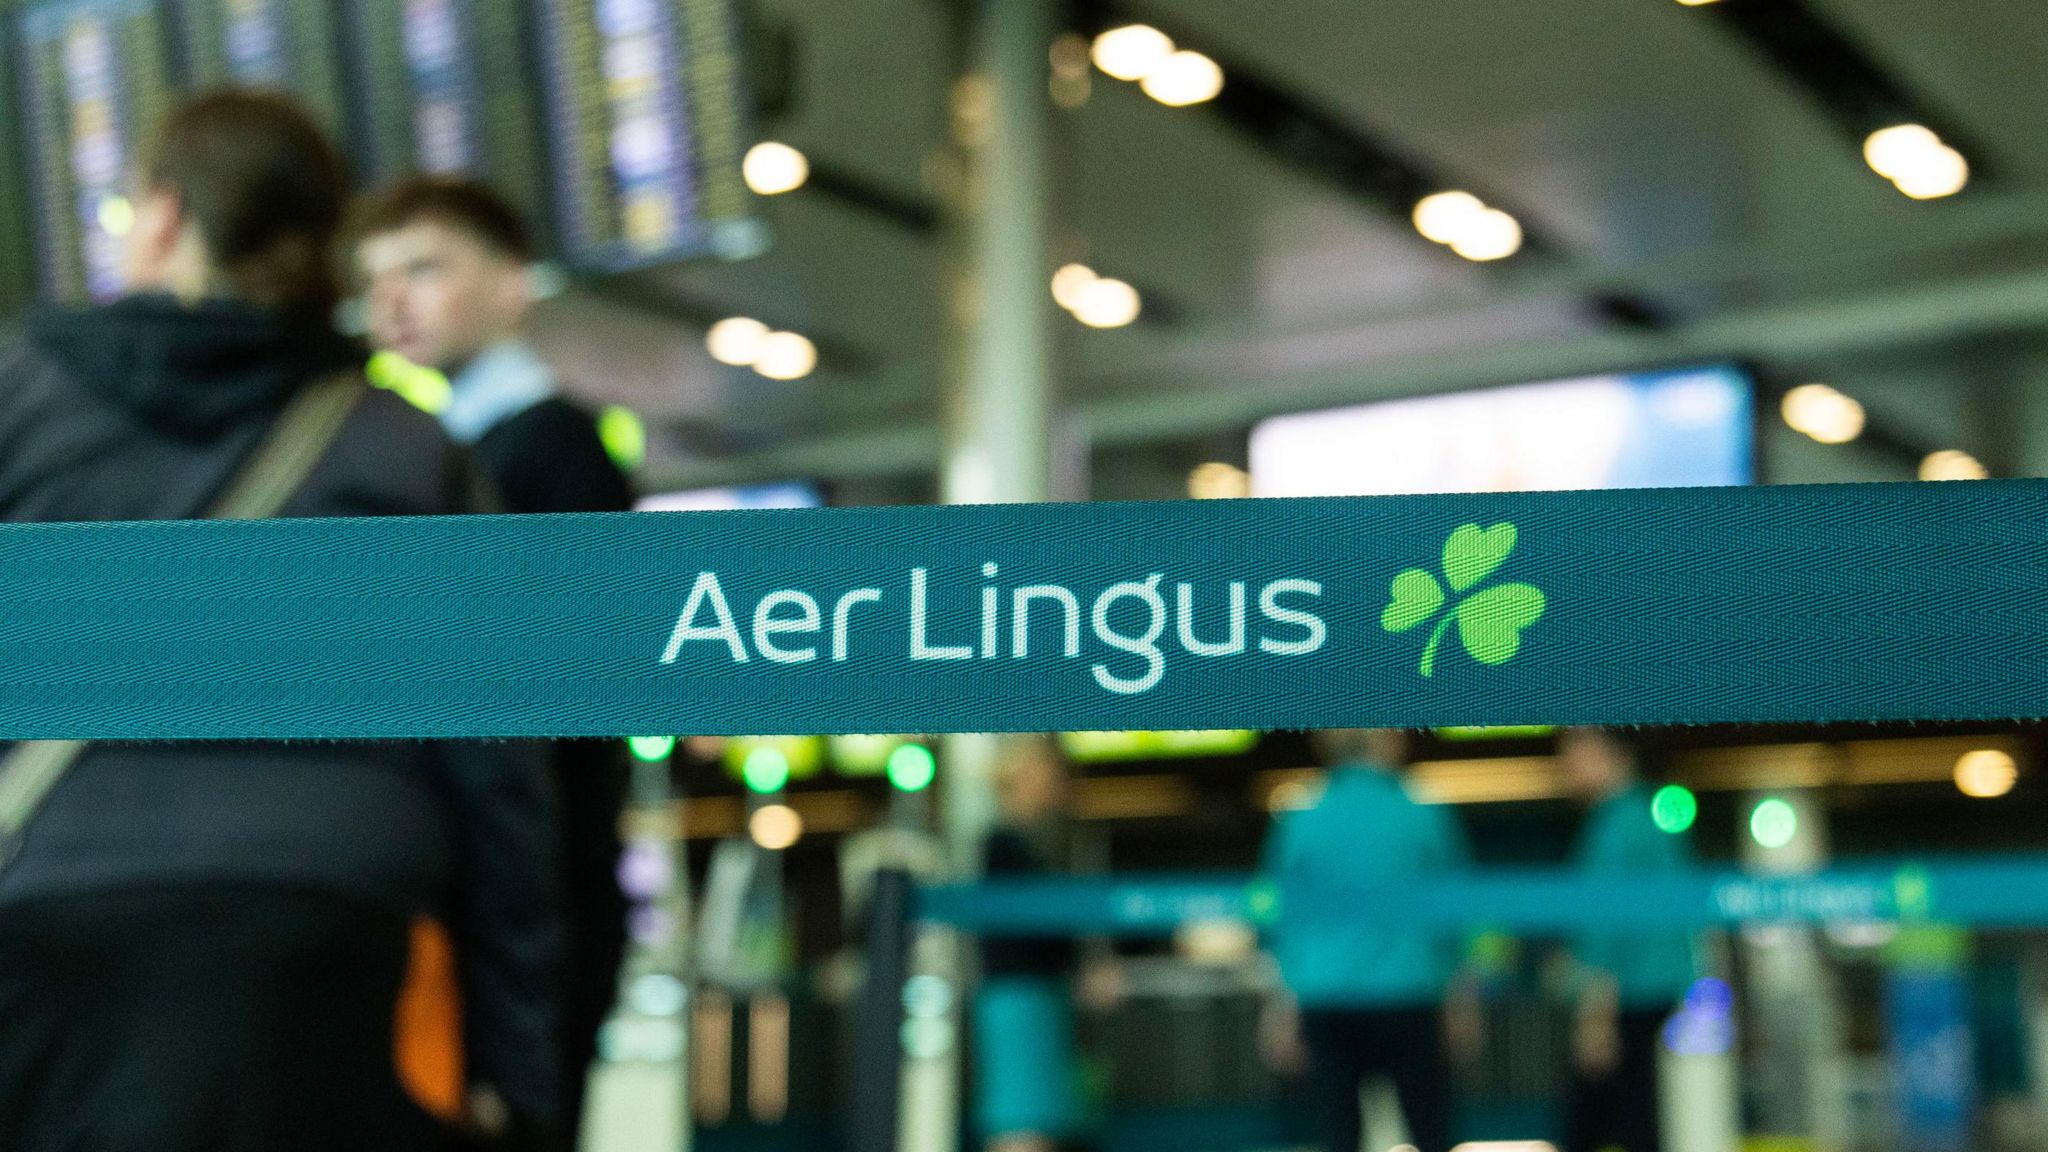 Image of Aer Lingus airport security banner